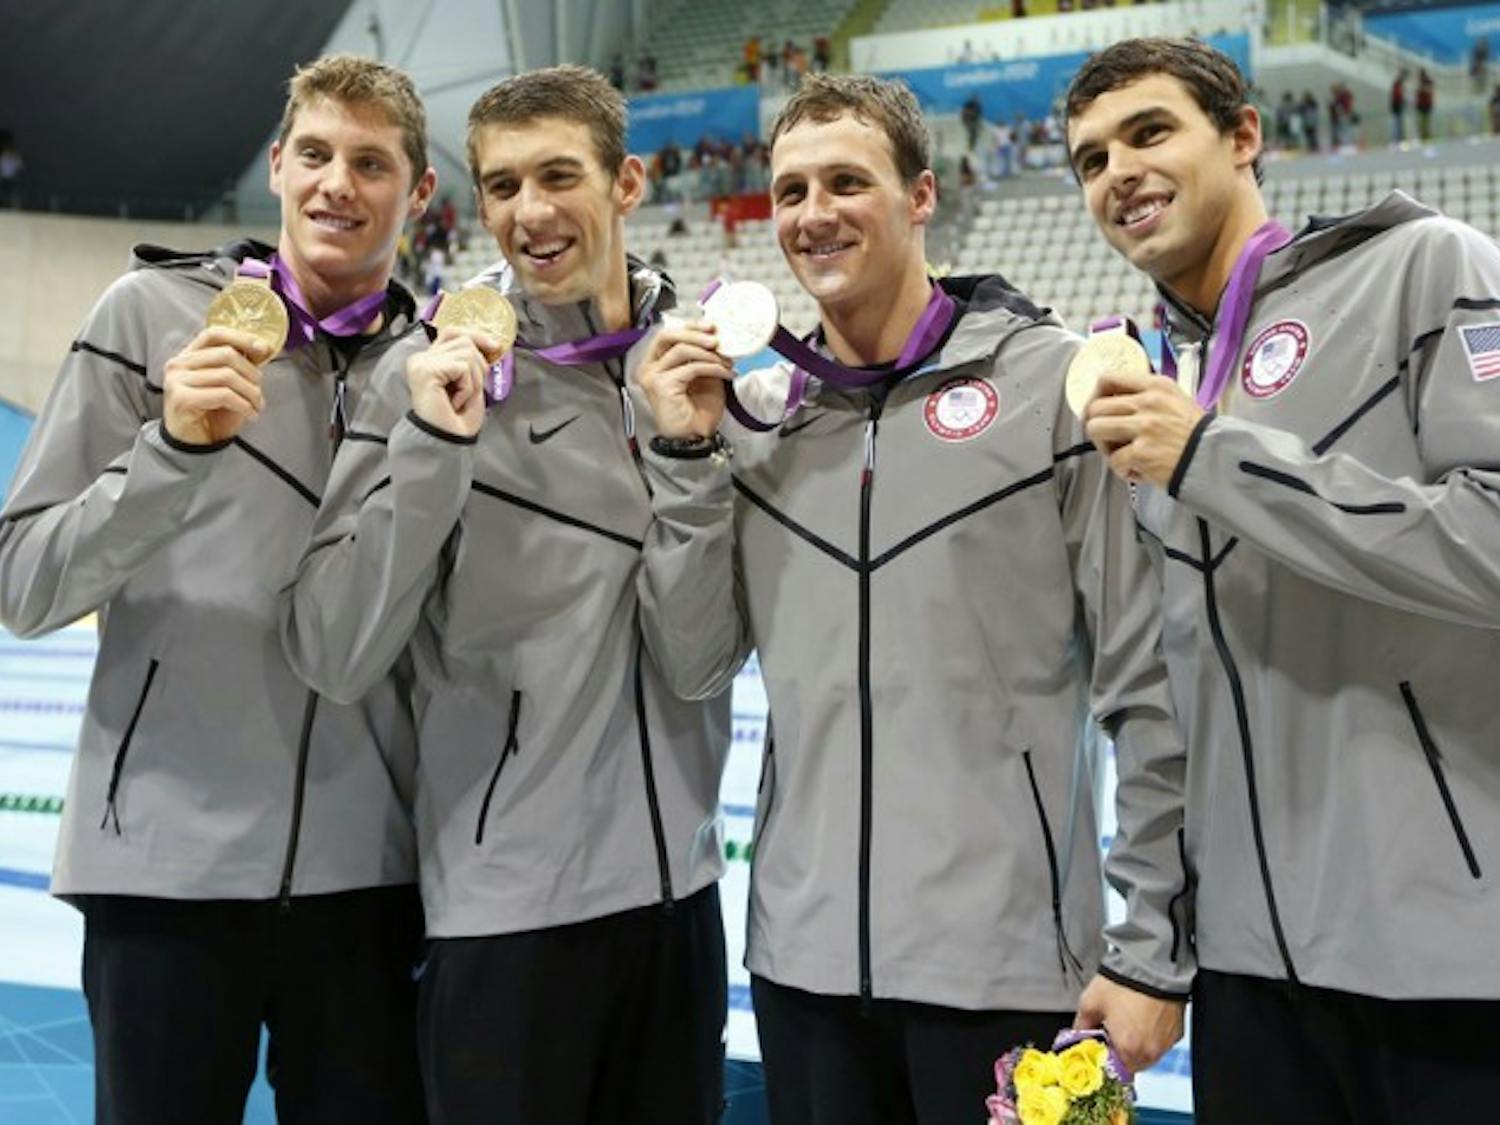 Former Gators Conor Dwyer (left) and Ryan Lochte (third from left) show off their gold medals after winning the 4x200-meter freestyle relay with a time of 6:59.70 at the 2012 London Olympics.&nbsp;